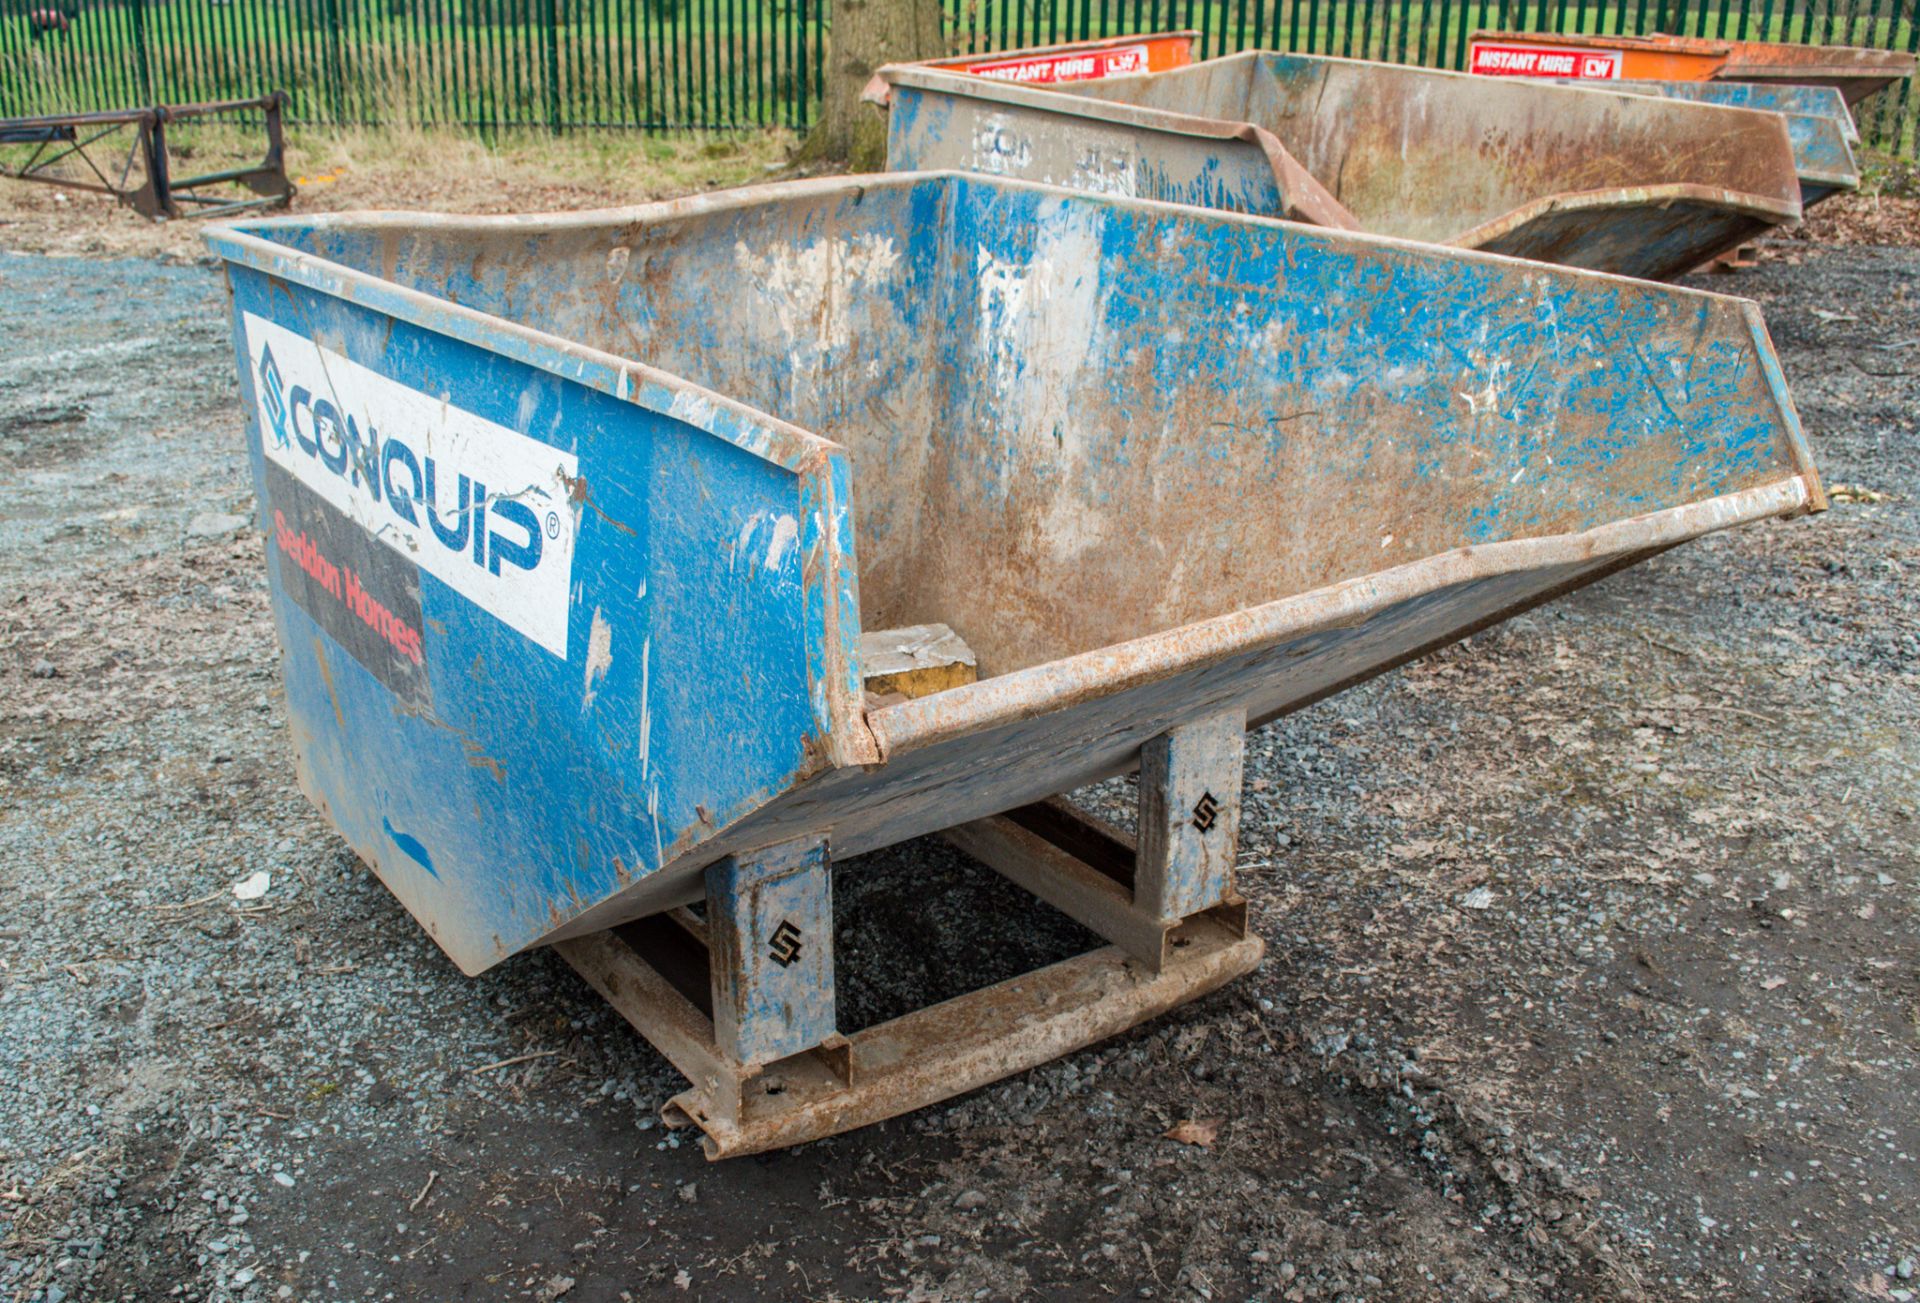 Conquip autolock fork lift tipping skip CW77294